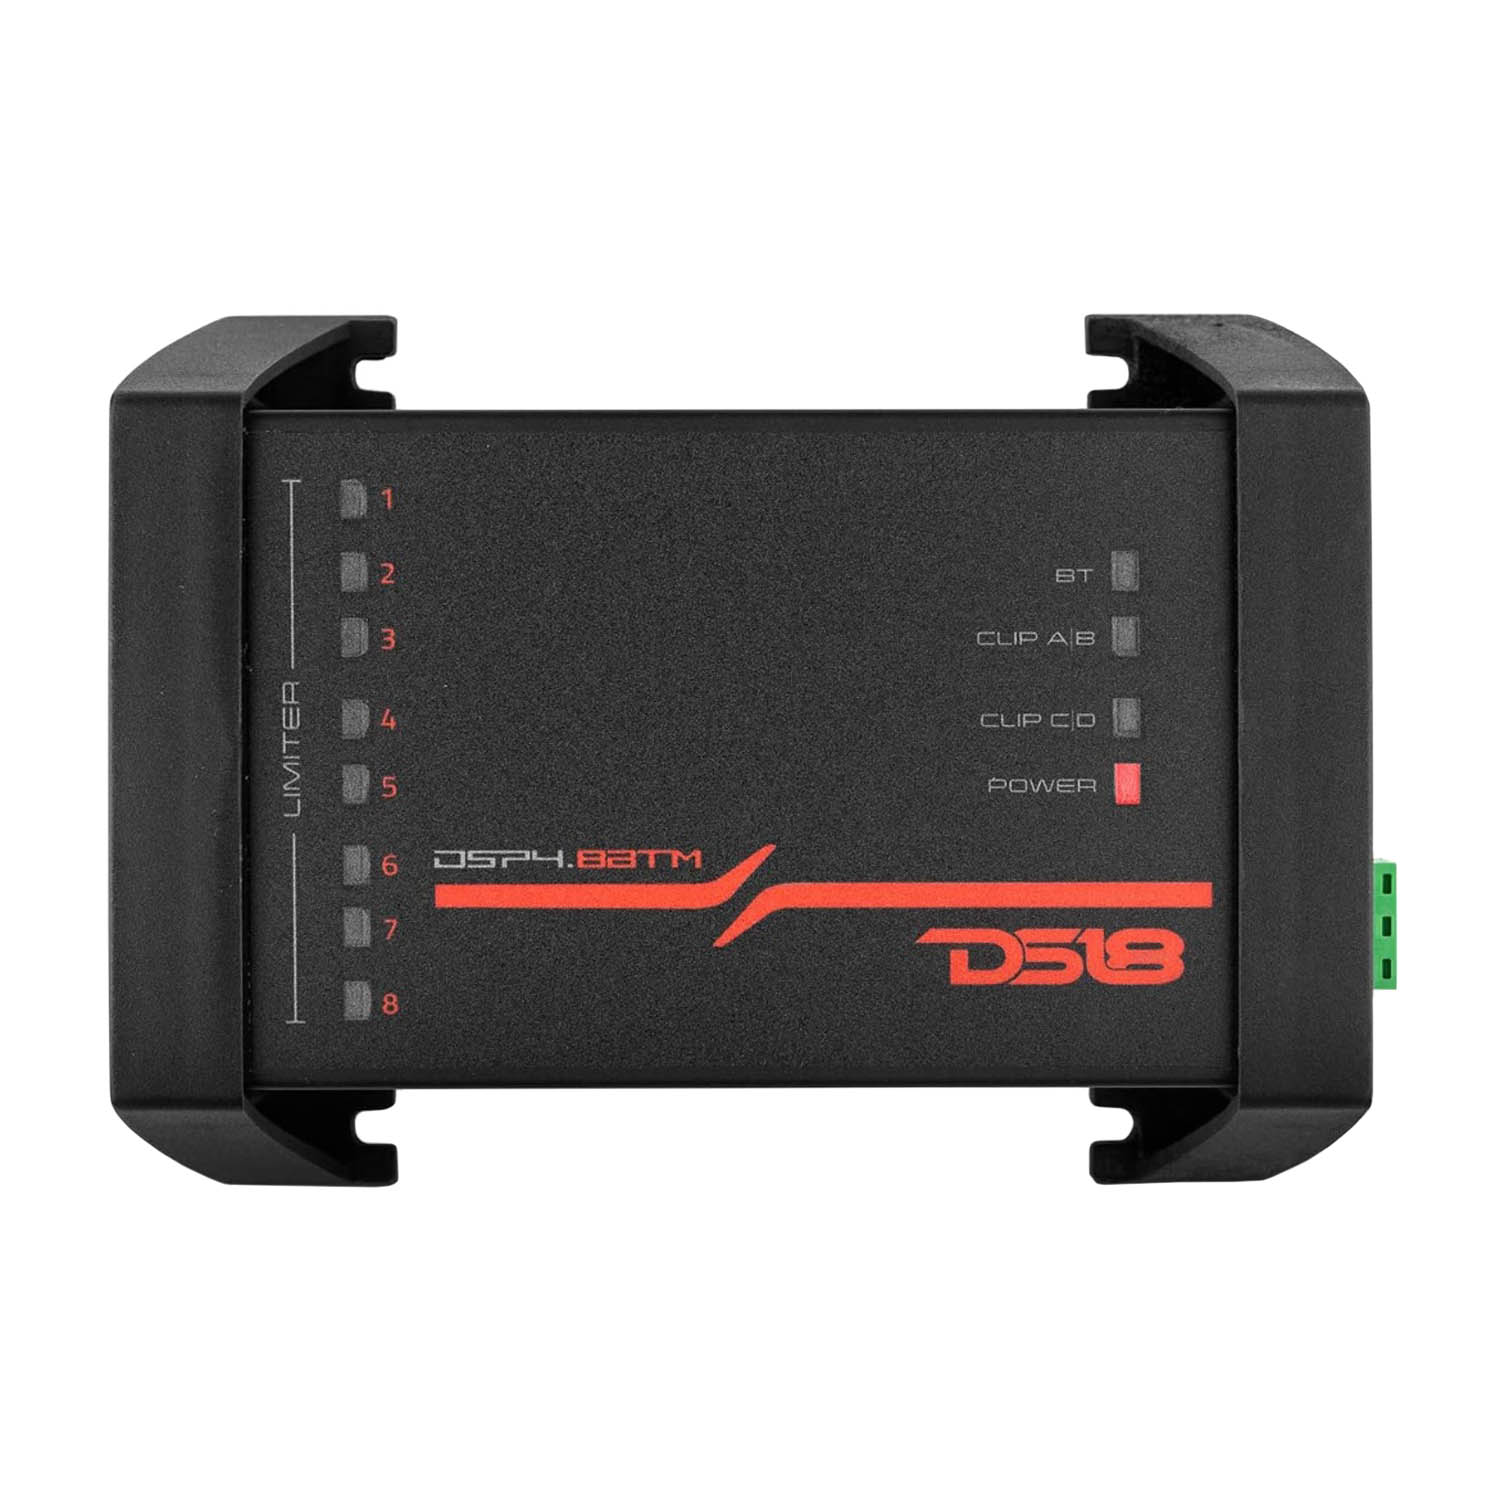 DS18 4-Channel In and 8-Channel Out Digital Sound Processor Bluetooth DSP4.8BTM